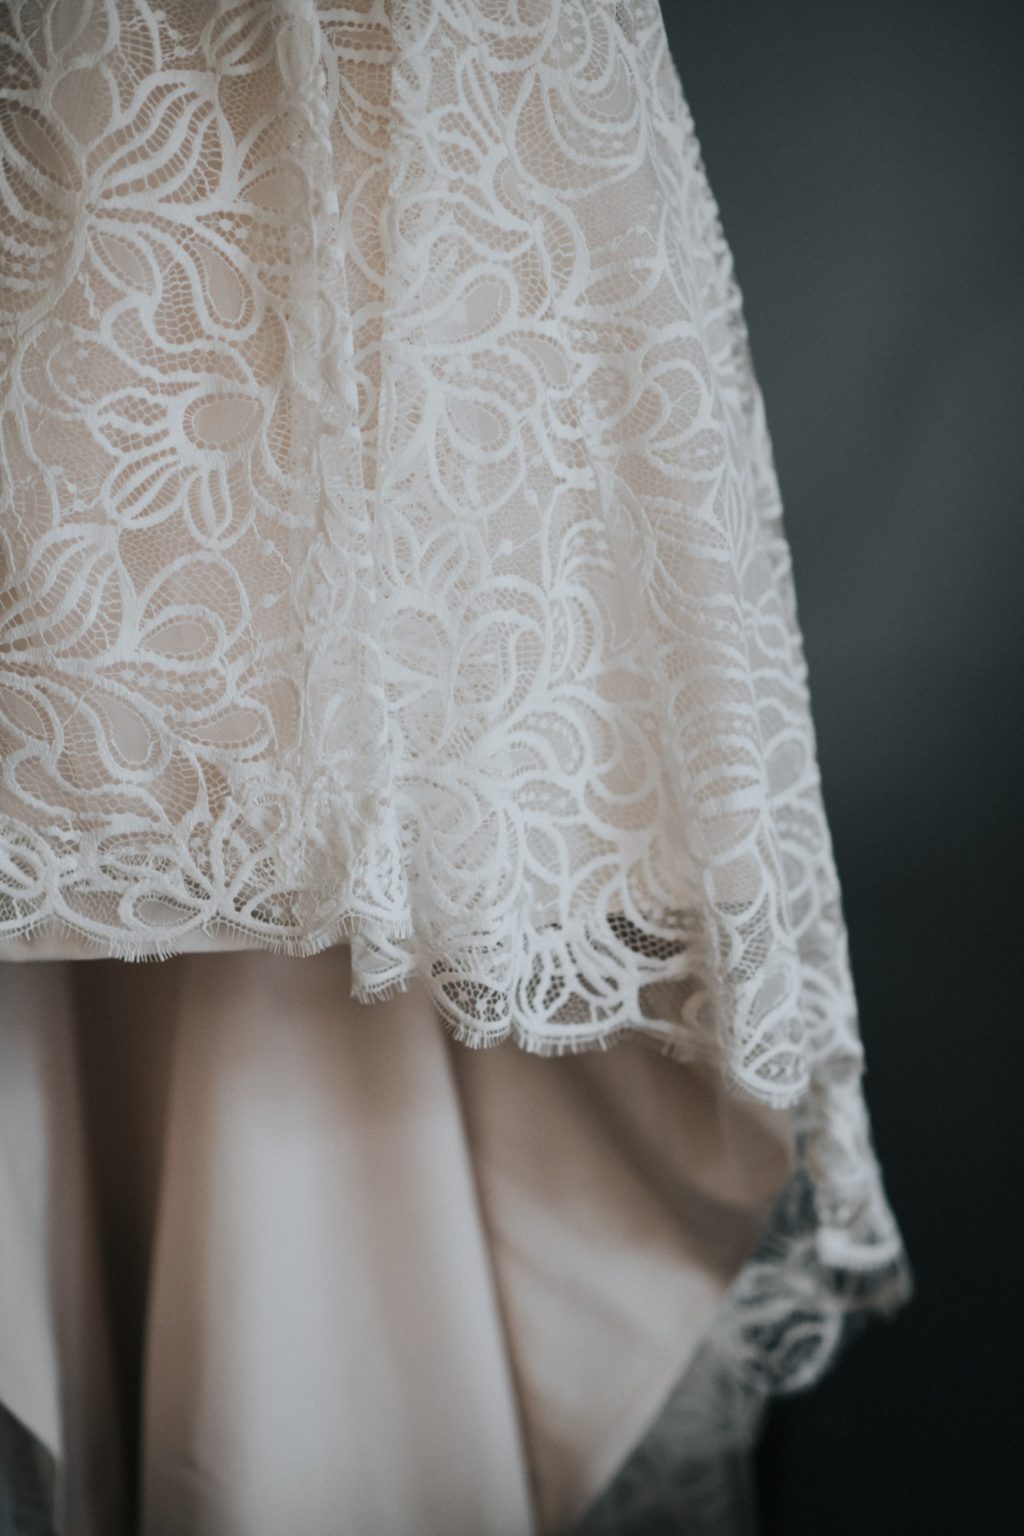 closeup of lace details of wedding dress